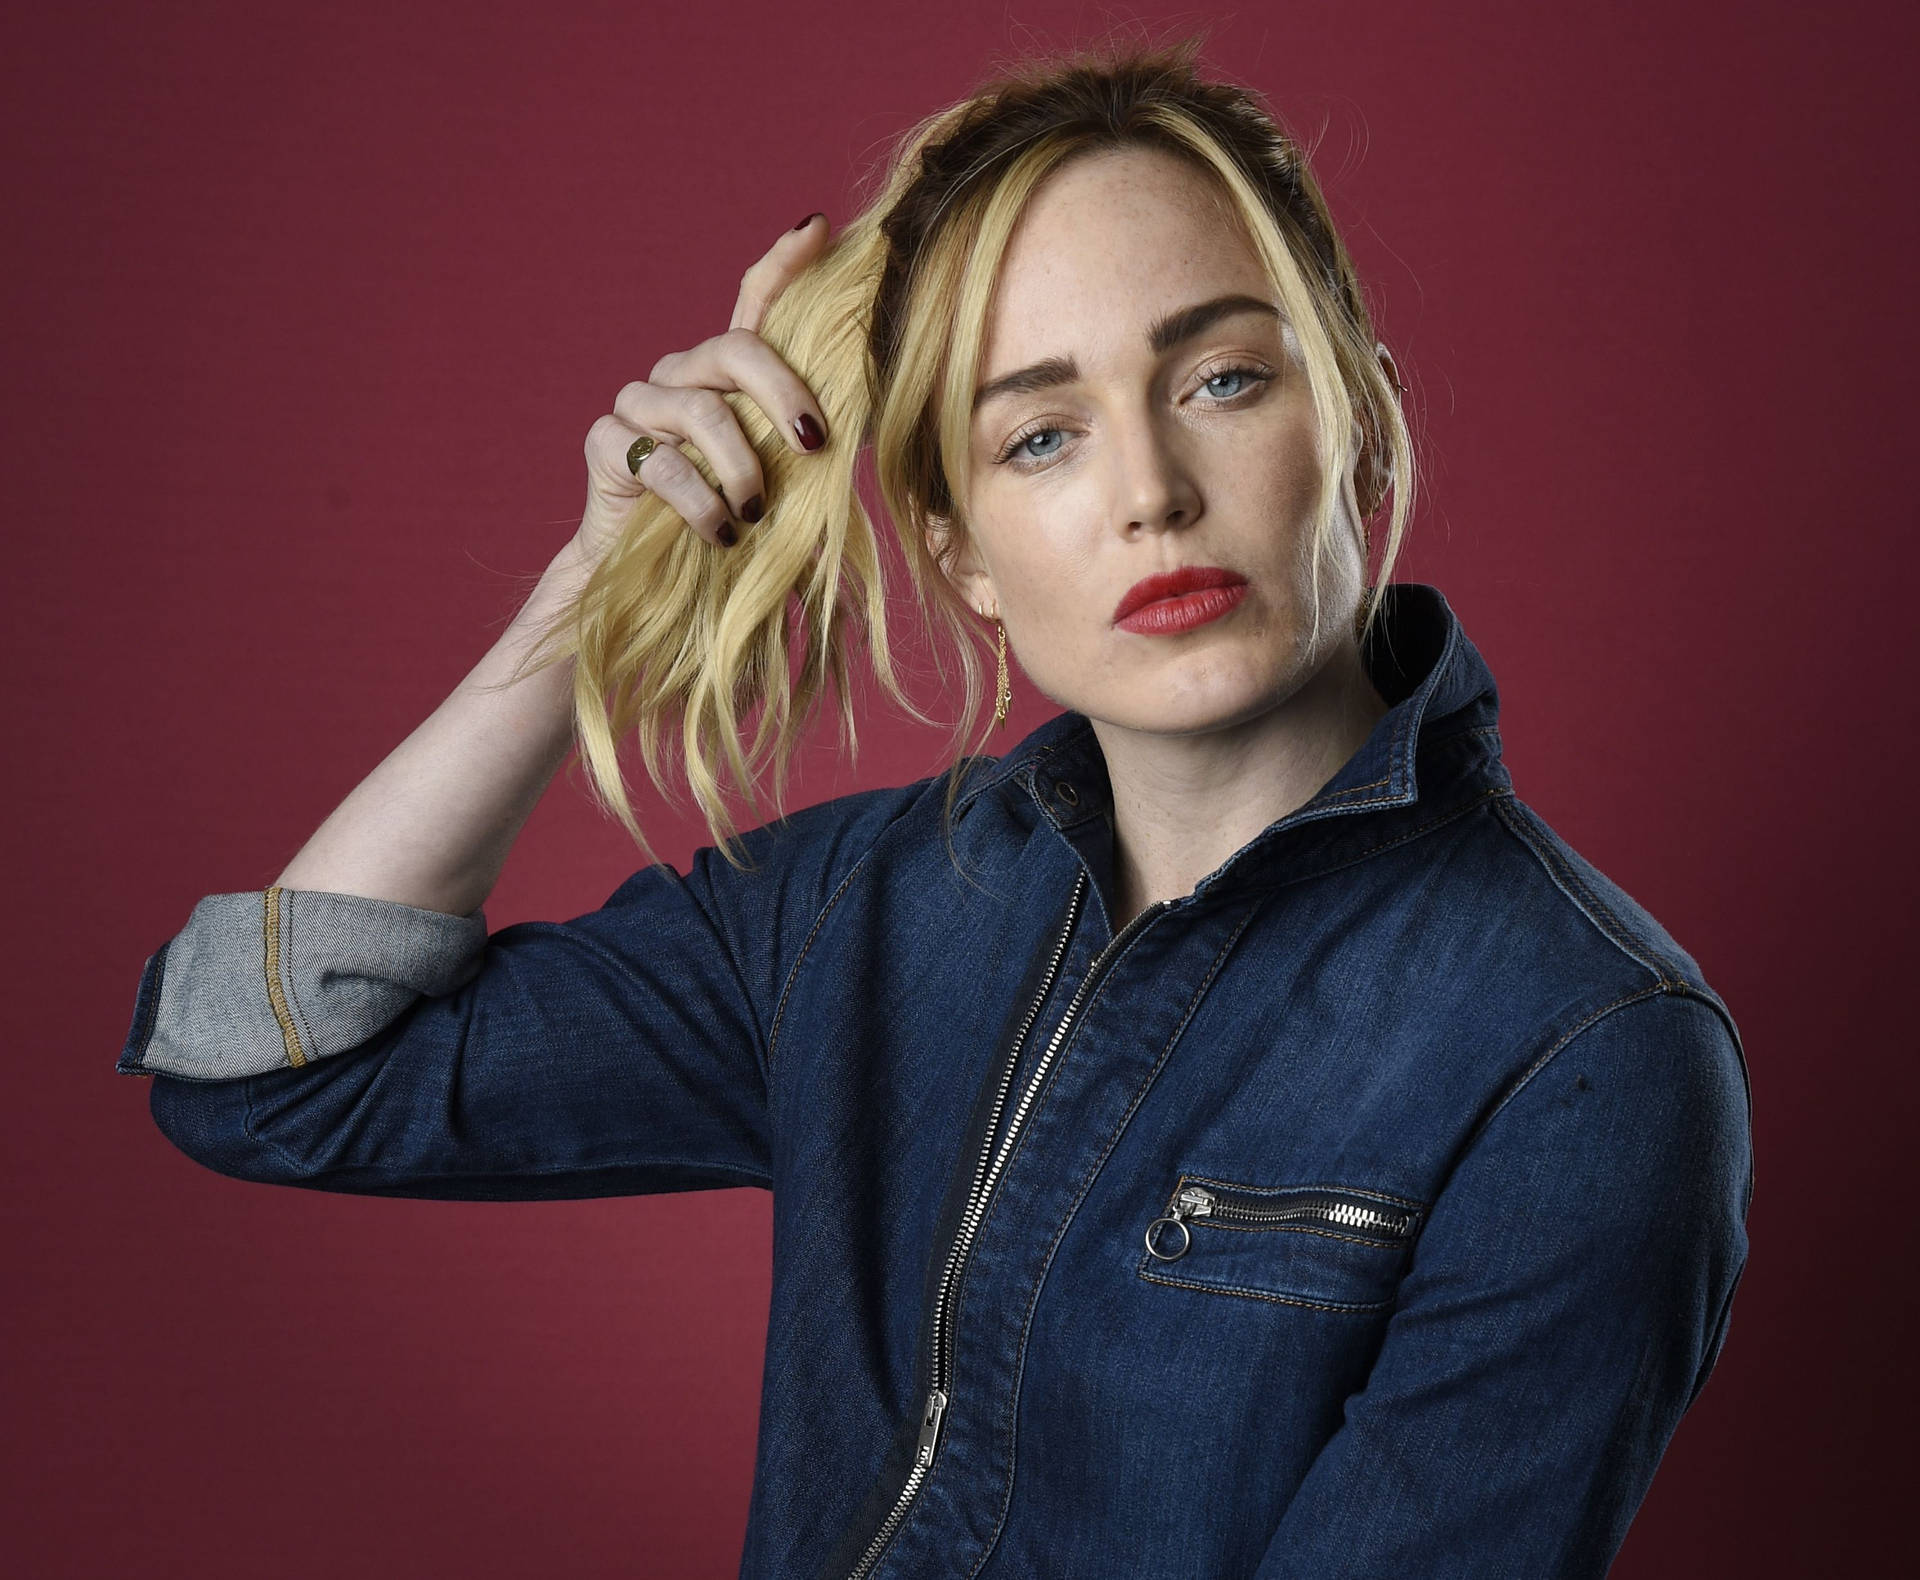 "Incredible shot of actress Caity Lotz capturing a serious expression" Wallpaper